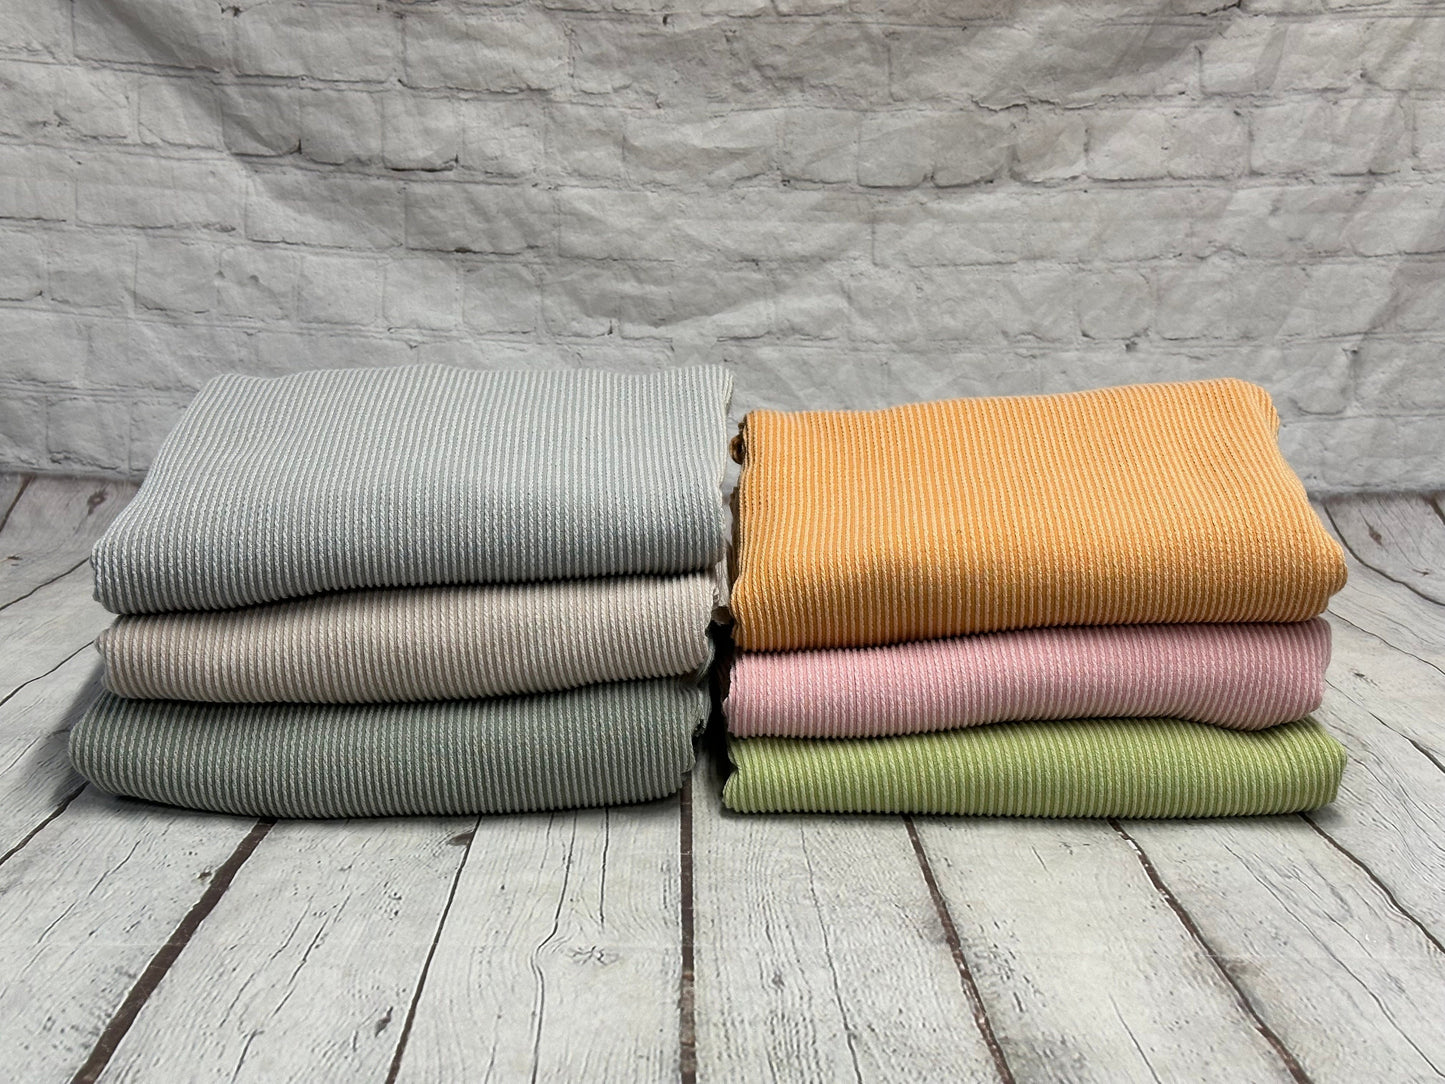 NEW COLORS! Dusty Light Color Rib Wave Knit Spandex Fabric By The Yard Cable Knit Spandex Texture Knit